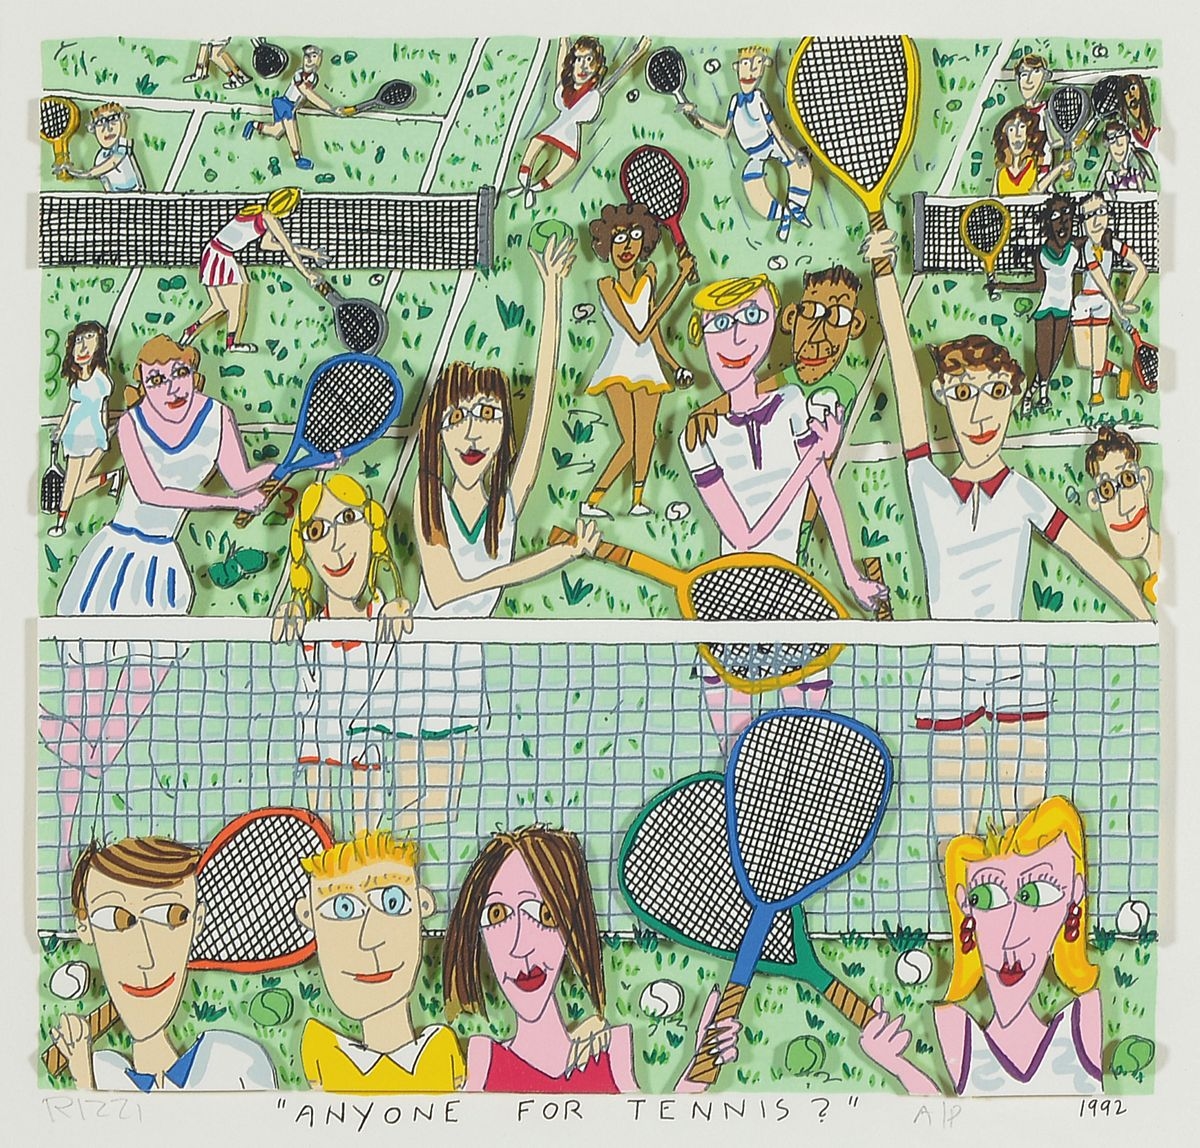 Anyone for Tennis? by James Rizzi, 1992